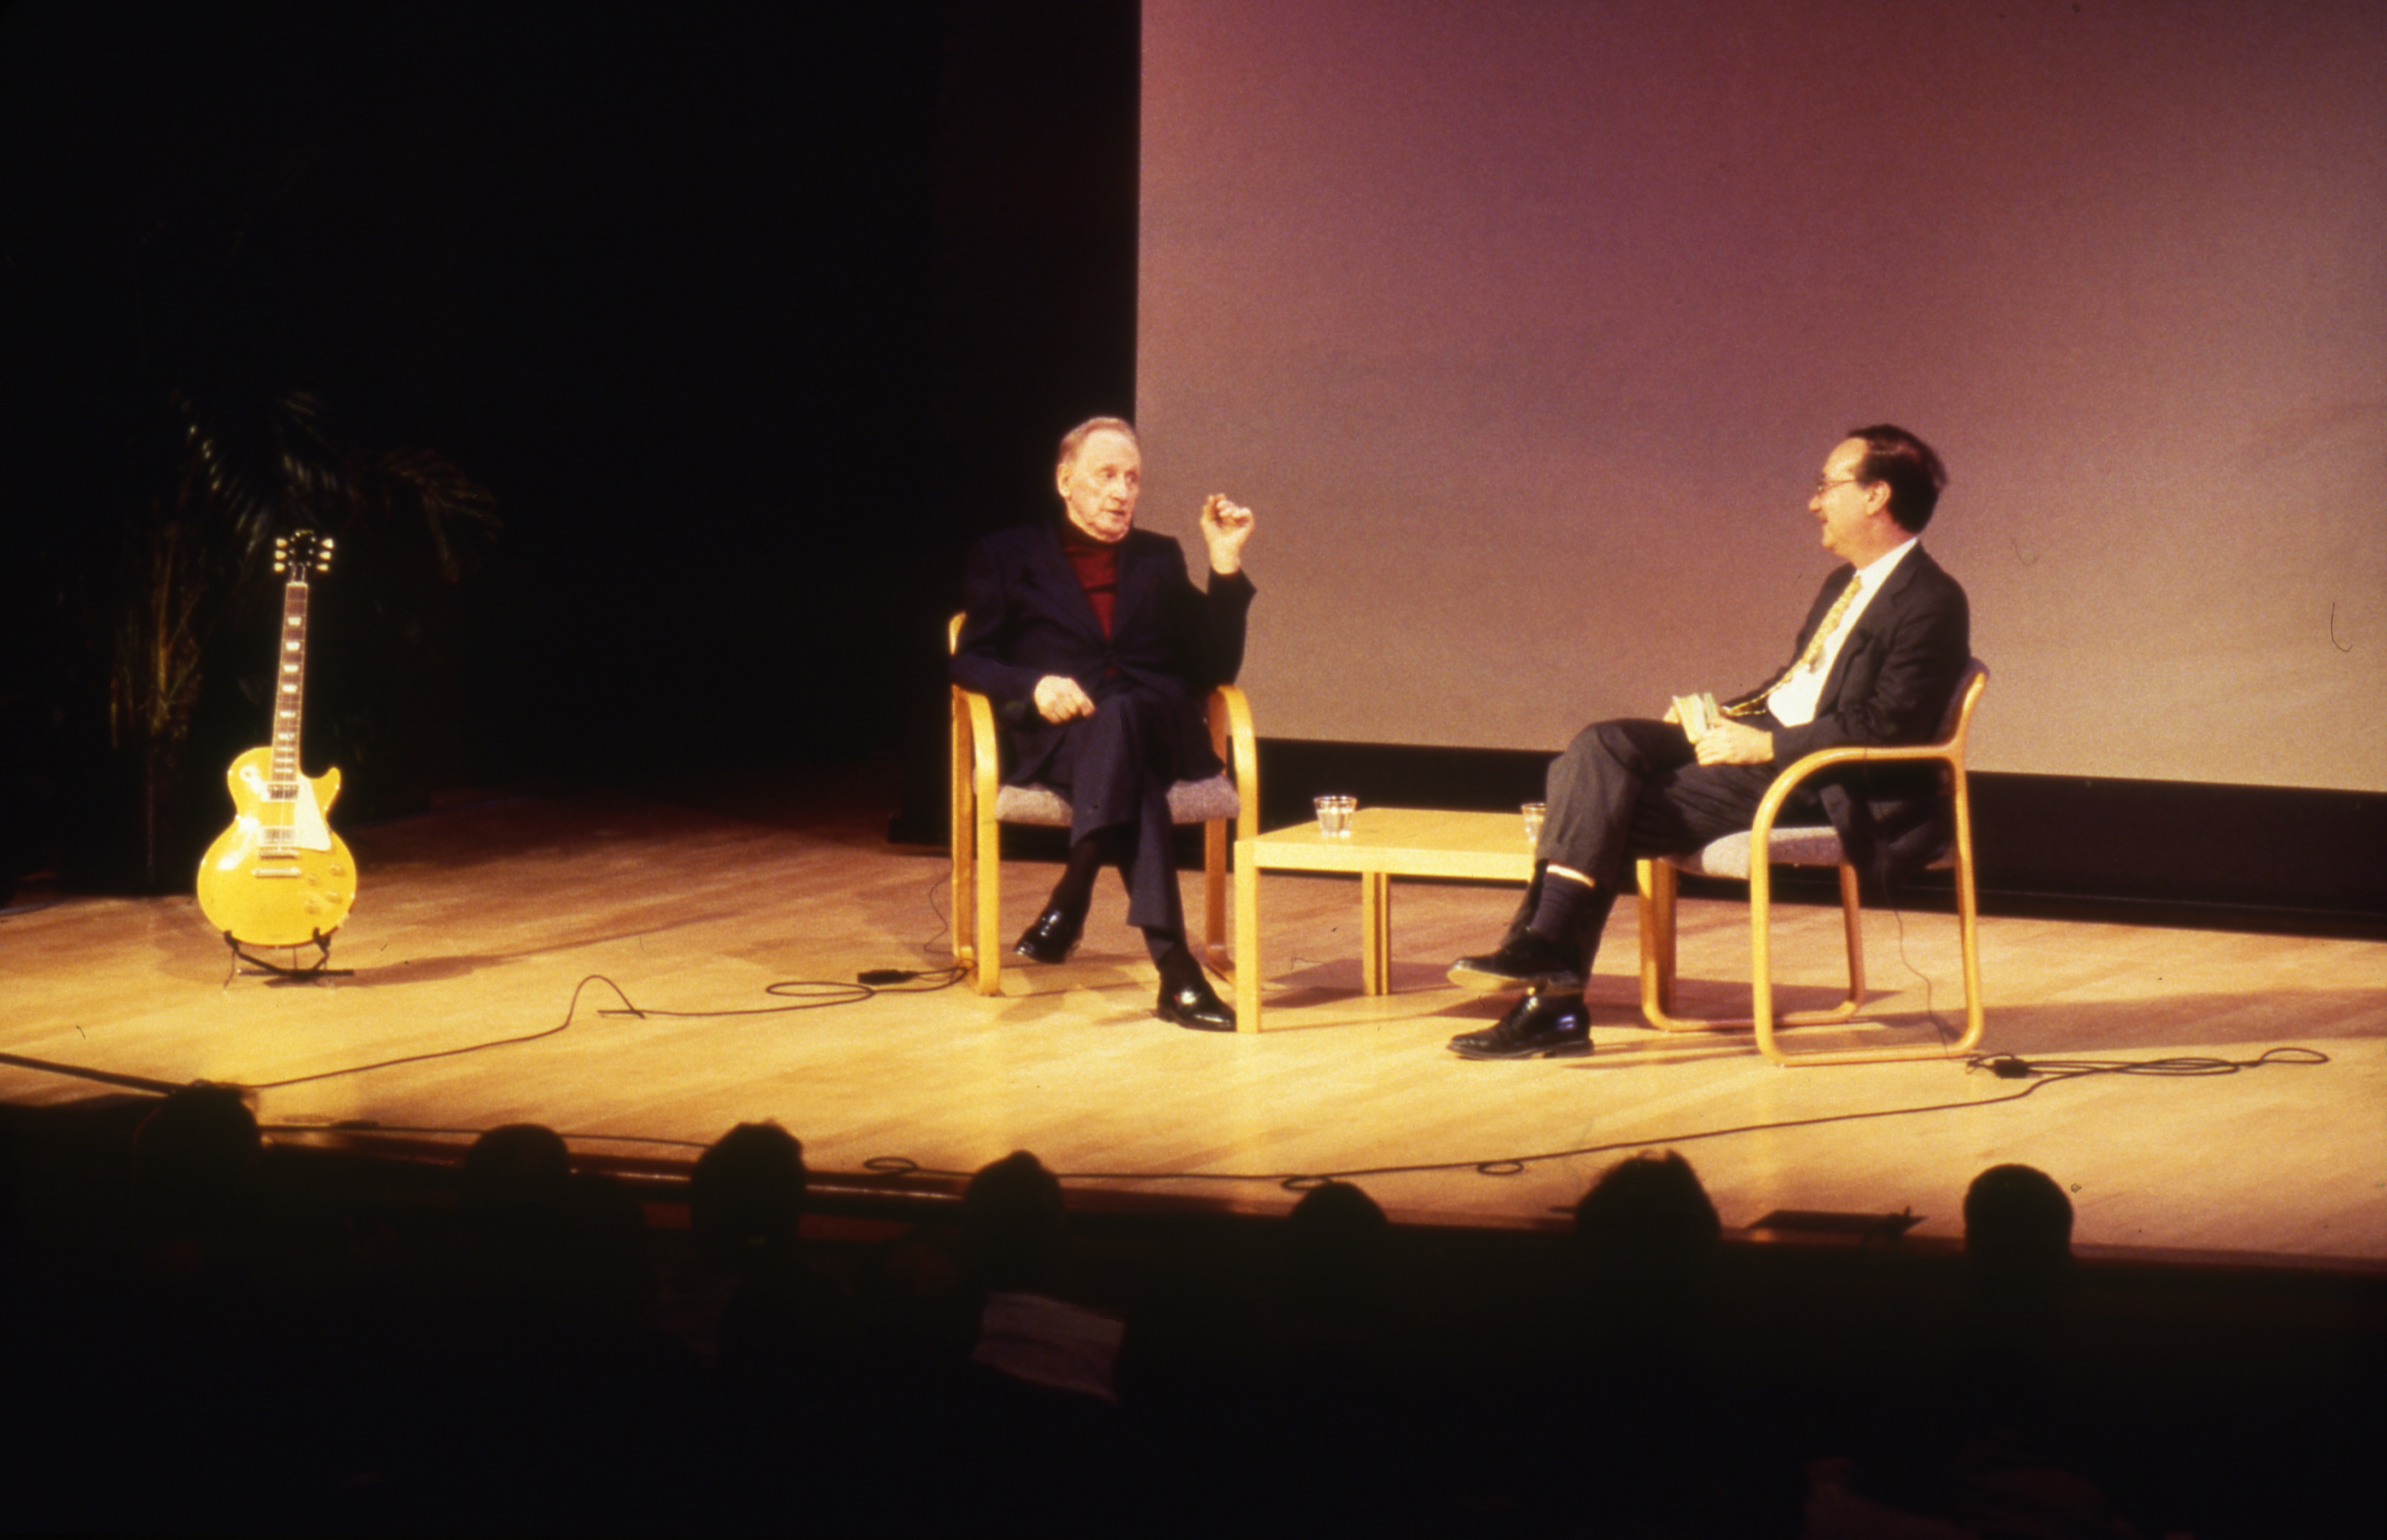 Les Paul and March Pachter seated on a stage having a conversation with a Les Paul guitar in a stand